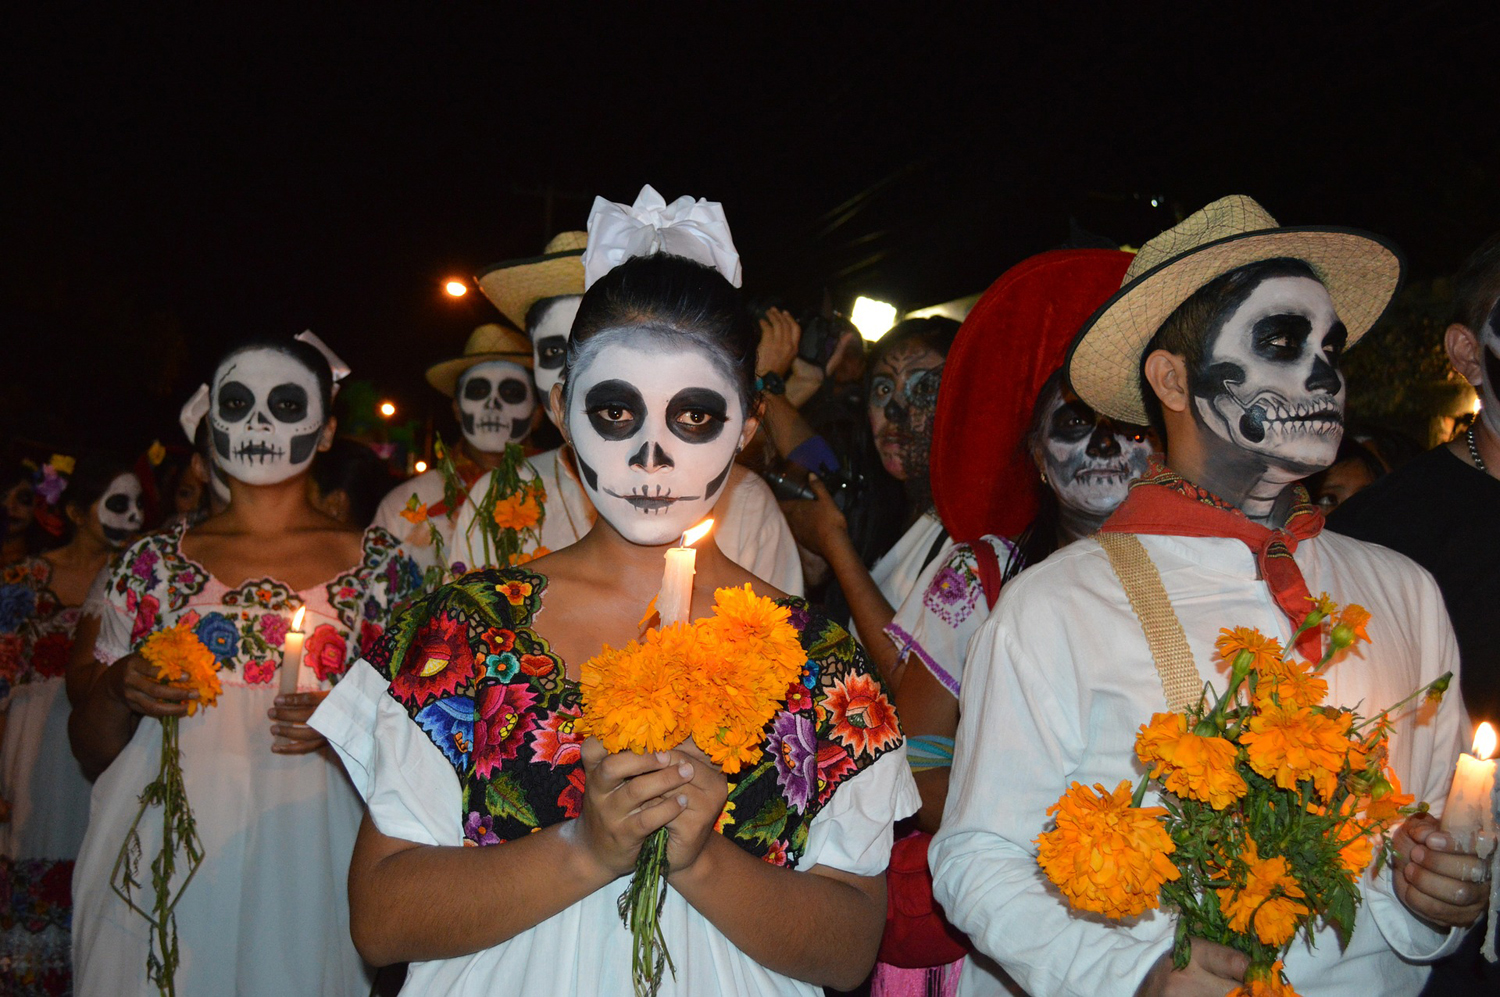 Journey Mexico's upcoming escorted group tours includes the 8-day Day of the Dead Tour in Oaxaca.